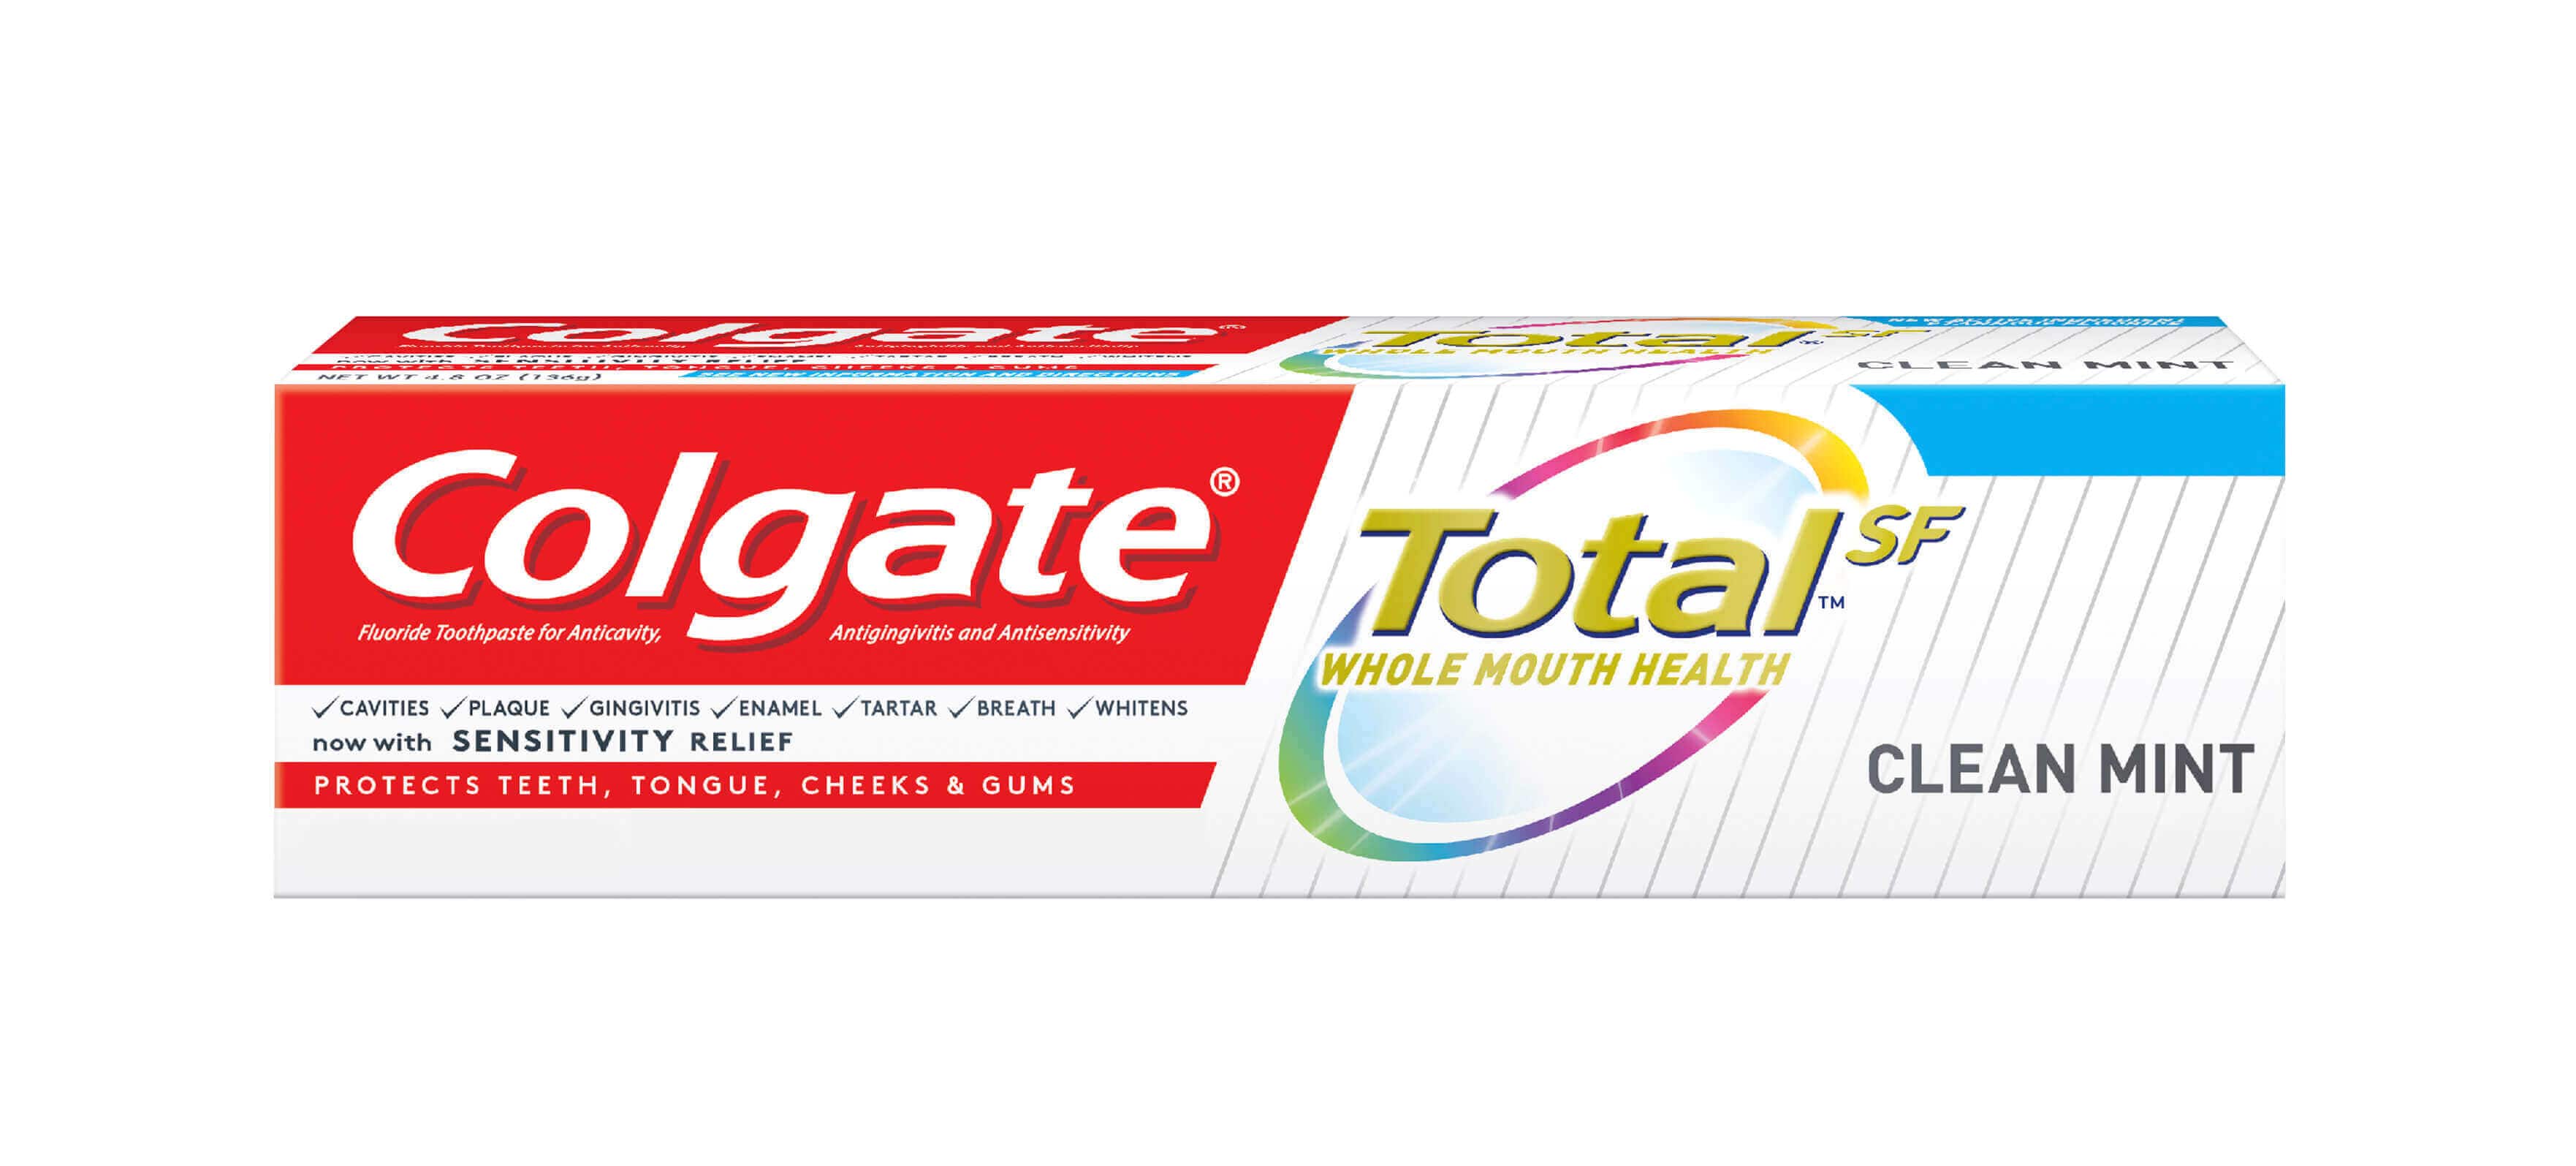 colgate total tooth paste box product image